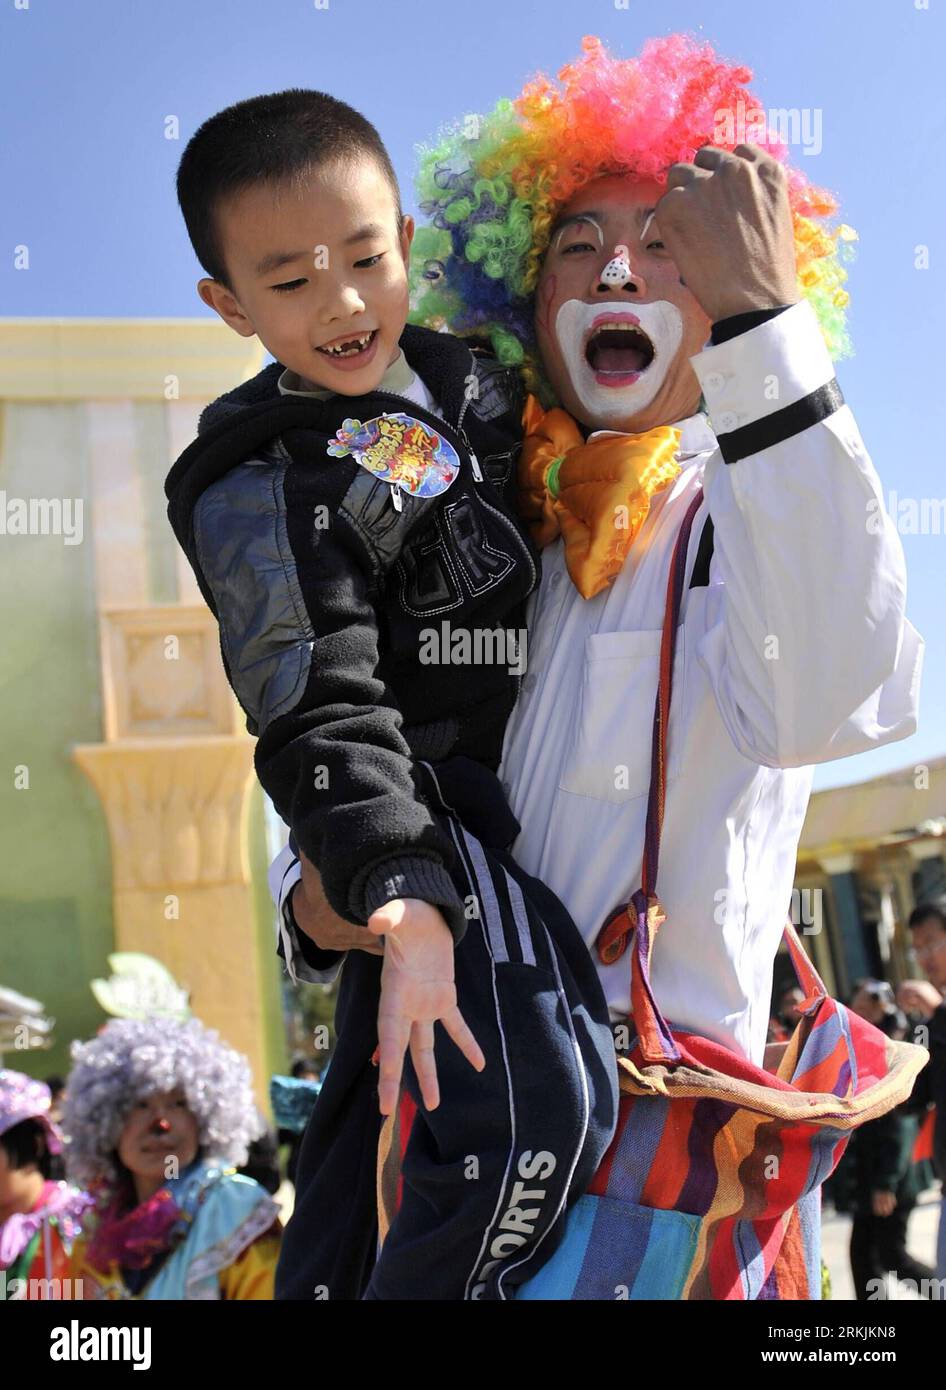 Bildnummer: 56142820  Datum: 03.10.2011  Copyright: imago/Xinhua (111003) -- CHANGCHUN, Oct. 3, 2011 (Xinhua) -- A clown plays with a visitor during an amusing carnival at a movie theme park in Changchun, capital of northeast China s Jilin Province, Oct. 3, 2011, the third day of the national holiday. (Xinhua/Wang Haofei) CHINA-JILIN-CHANGCHUN-CARNIVAL-CLOWNS (CN) PUBLICATIONxNOTxINxCHN Gesellschaft Karneval Clown Freizeitpark xns x0x 2011 hoch      56142820 Date 03 10 2011 Copyright Imago XINHUA  Changchun OCT 3 2011 XINHUA a Clown PLAYS With a Visitor during to amusing Carnival AT a Movie Th Stock Photo